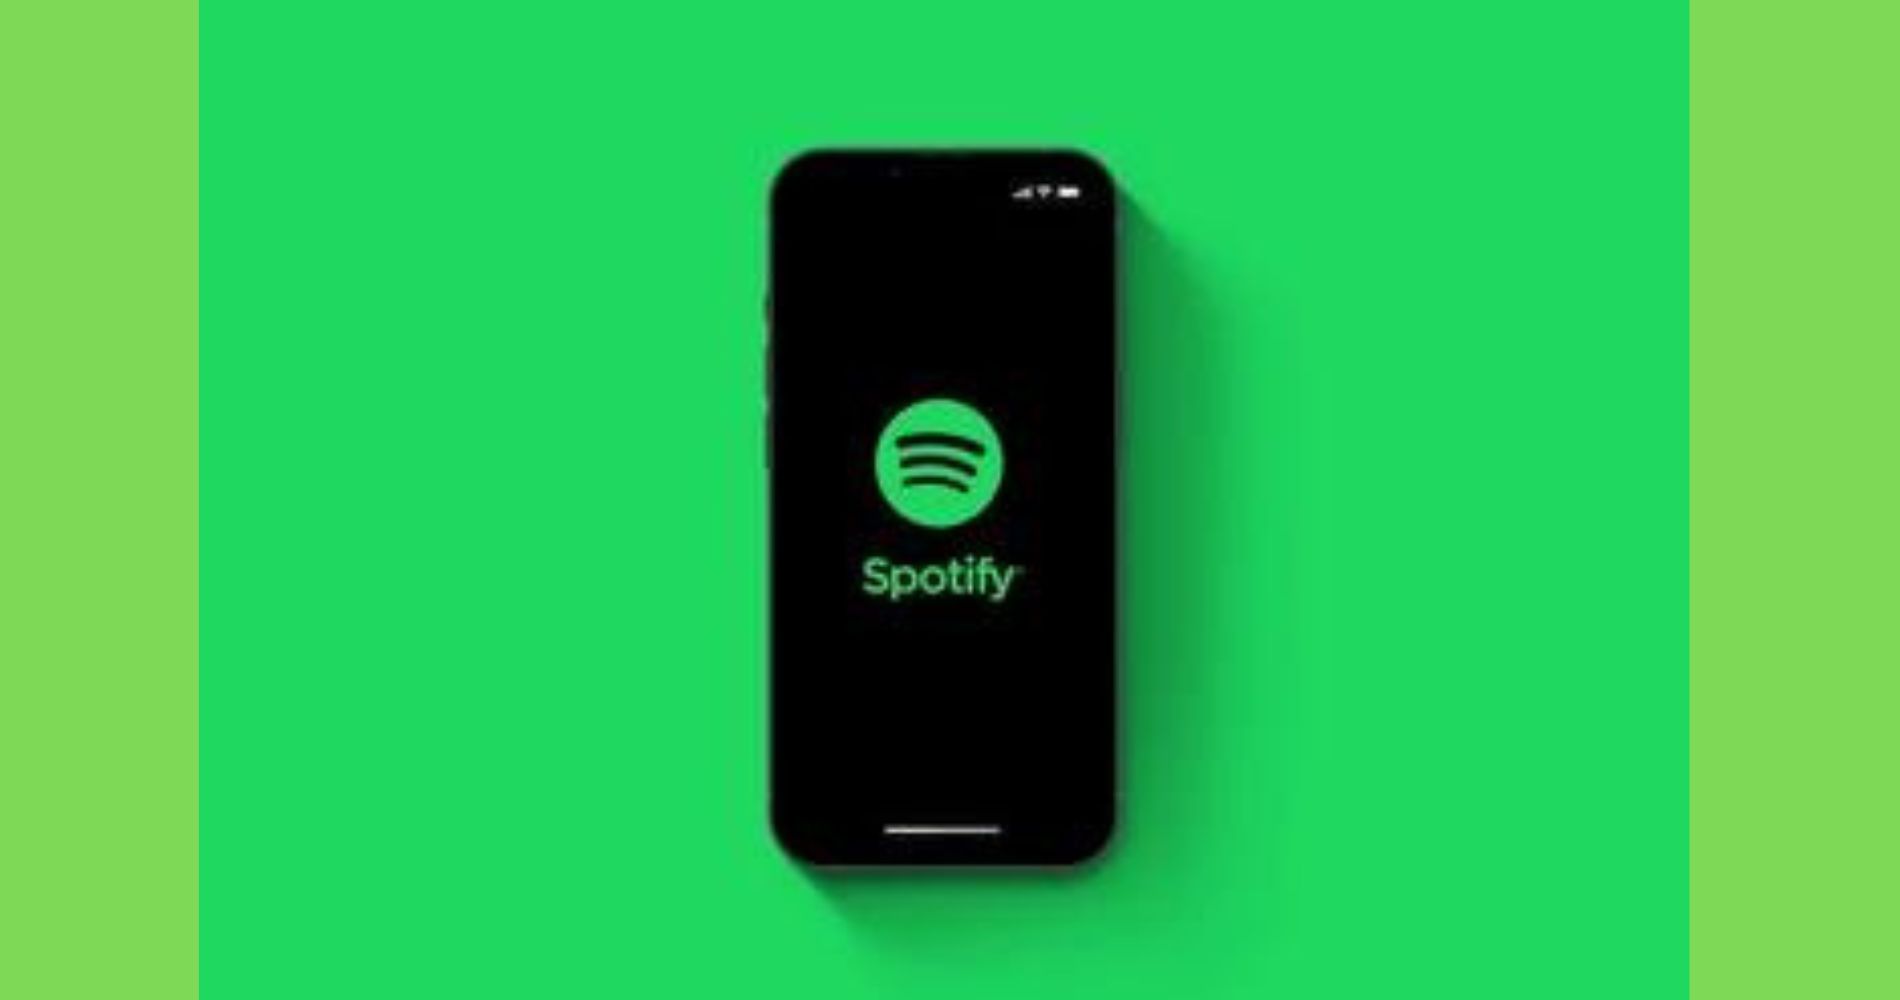 Spotify brings redesigned home screen with sections for music, podcasts